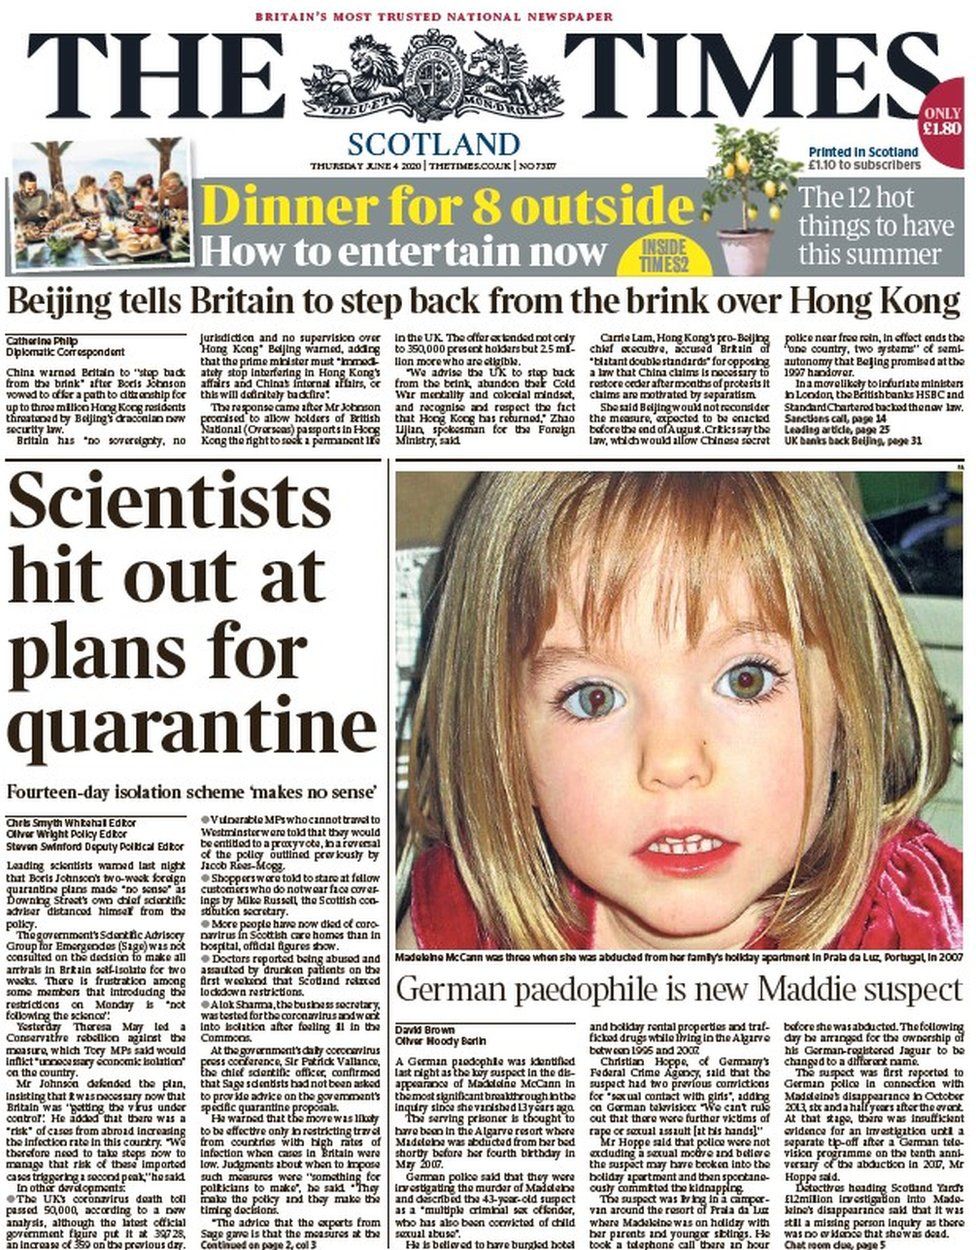 Scotland S Papers New Prime Suspect In Search For Madeleine Mccann c News